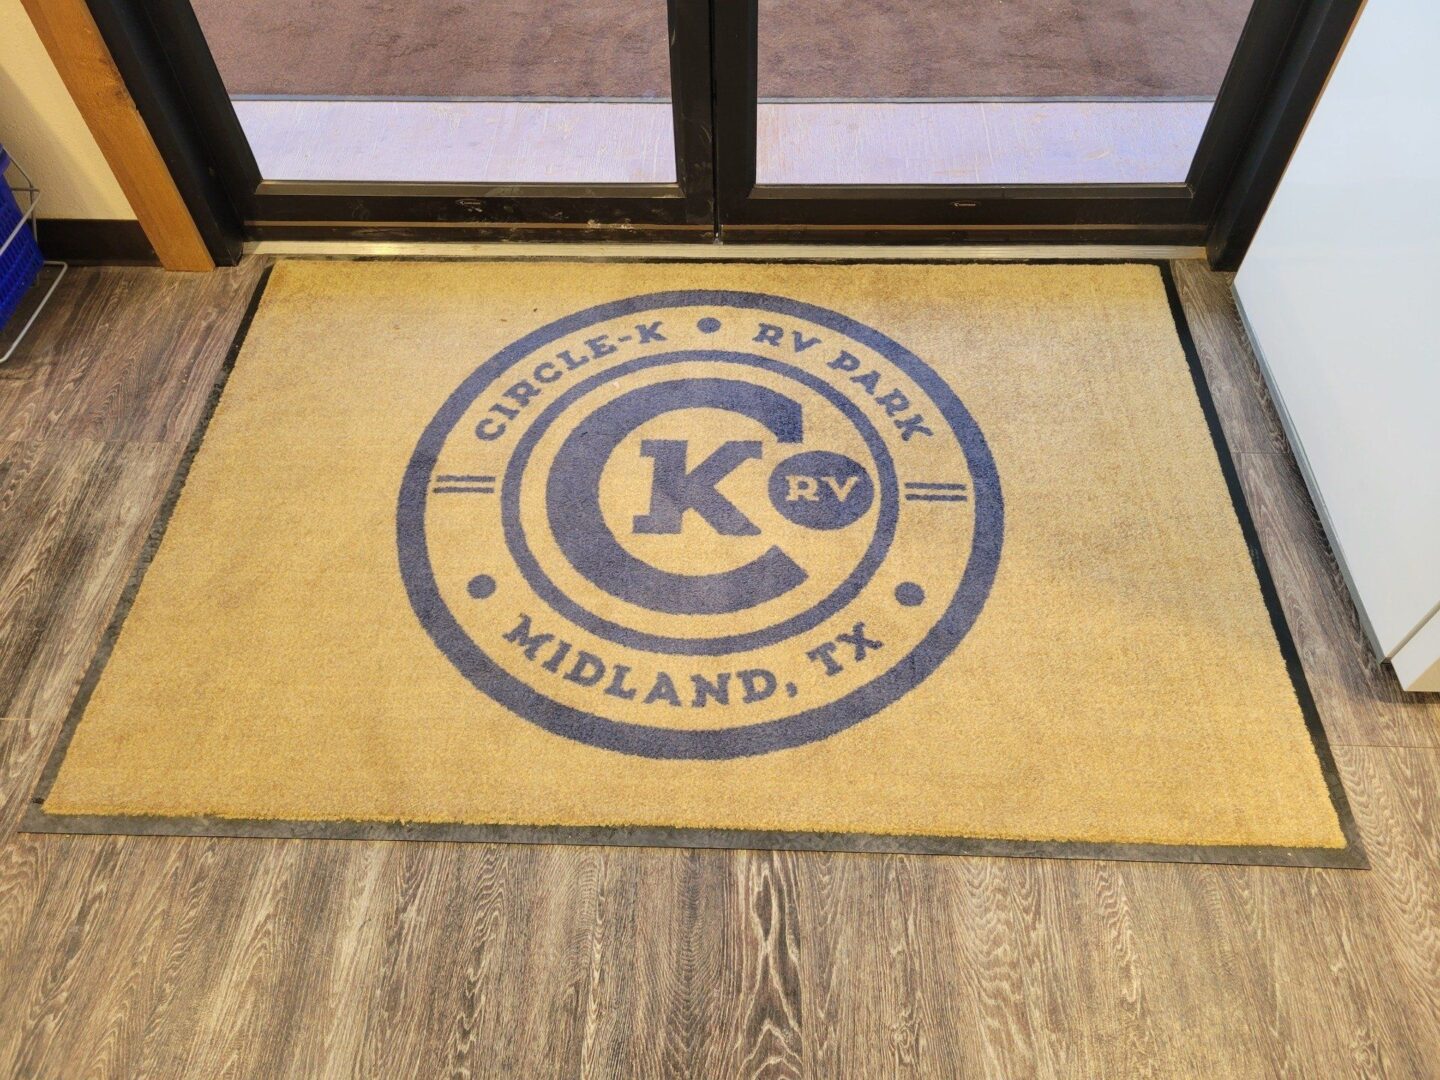 A floor mat with the letter k and circle by mark.